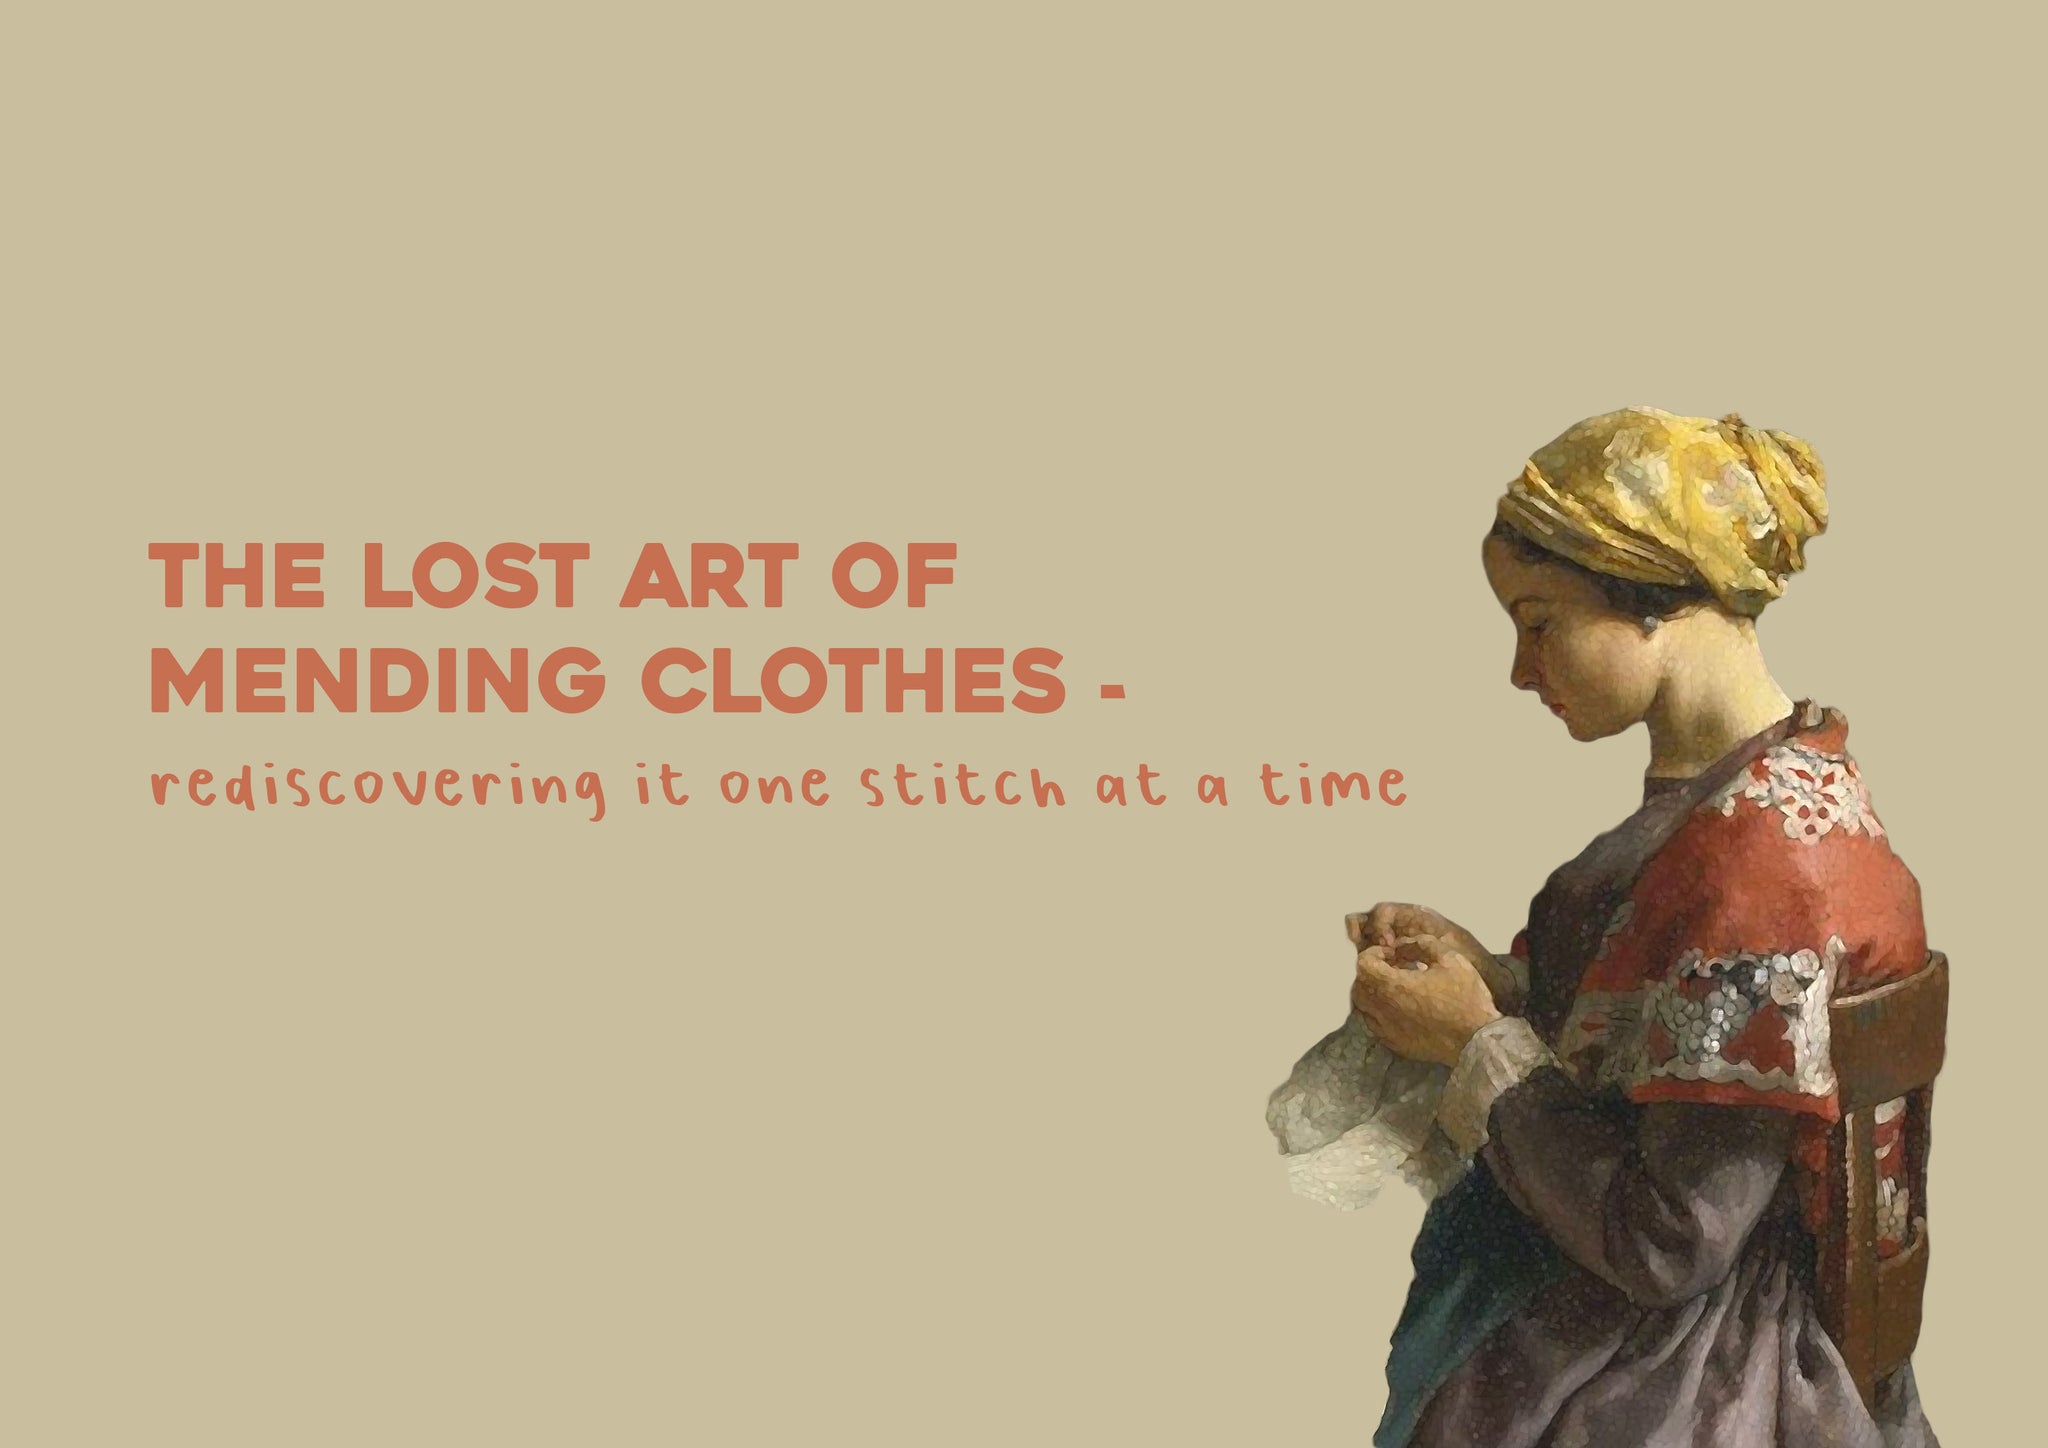 The lost art of mending clothes - rediscovering it one stitch at a time